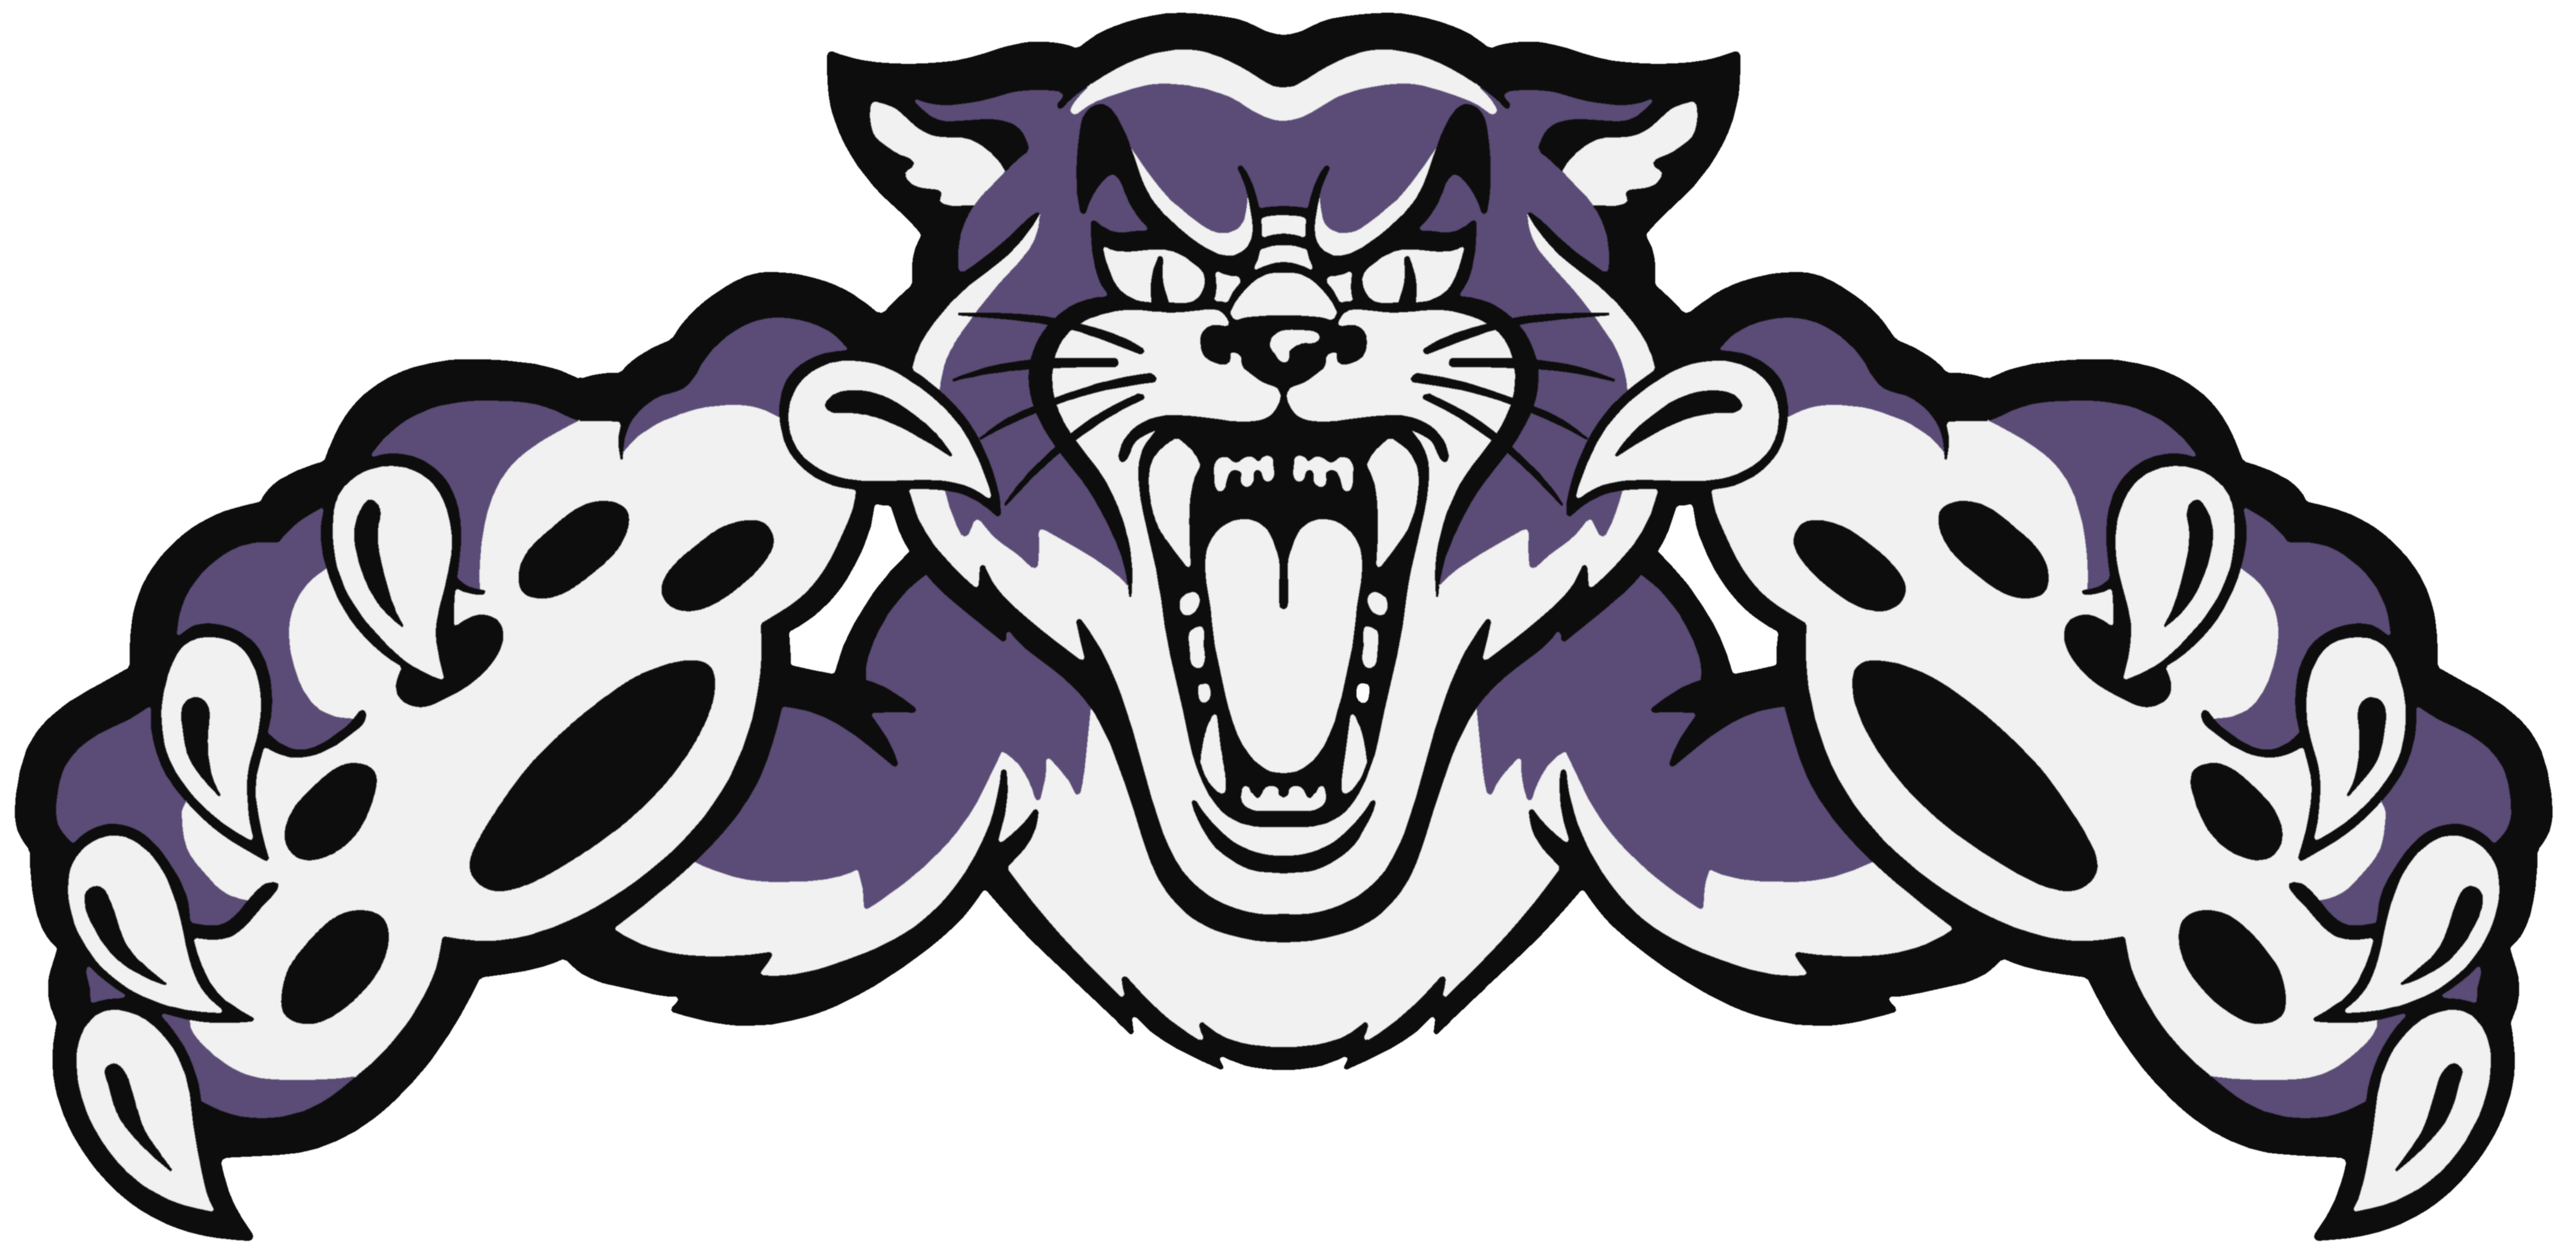 Wildcats Logo - Best Photo Of Wildcats Logo Designs Welch. Projects & Ideas